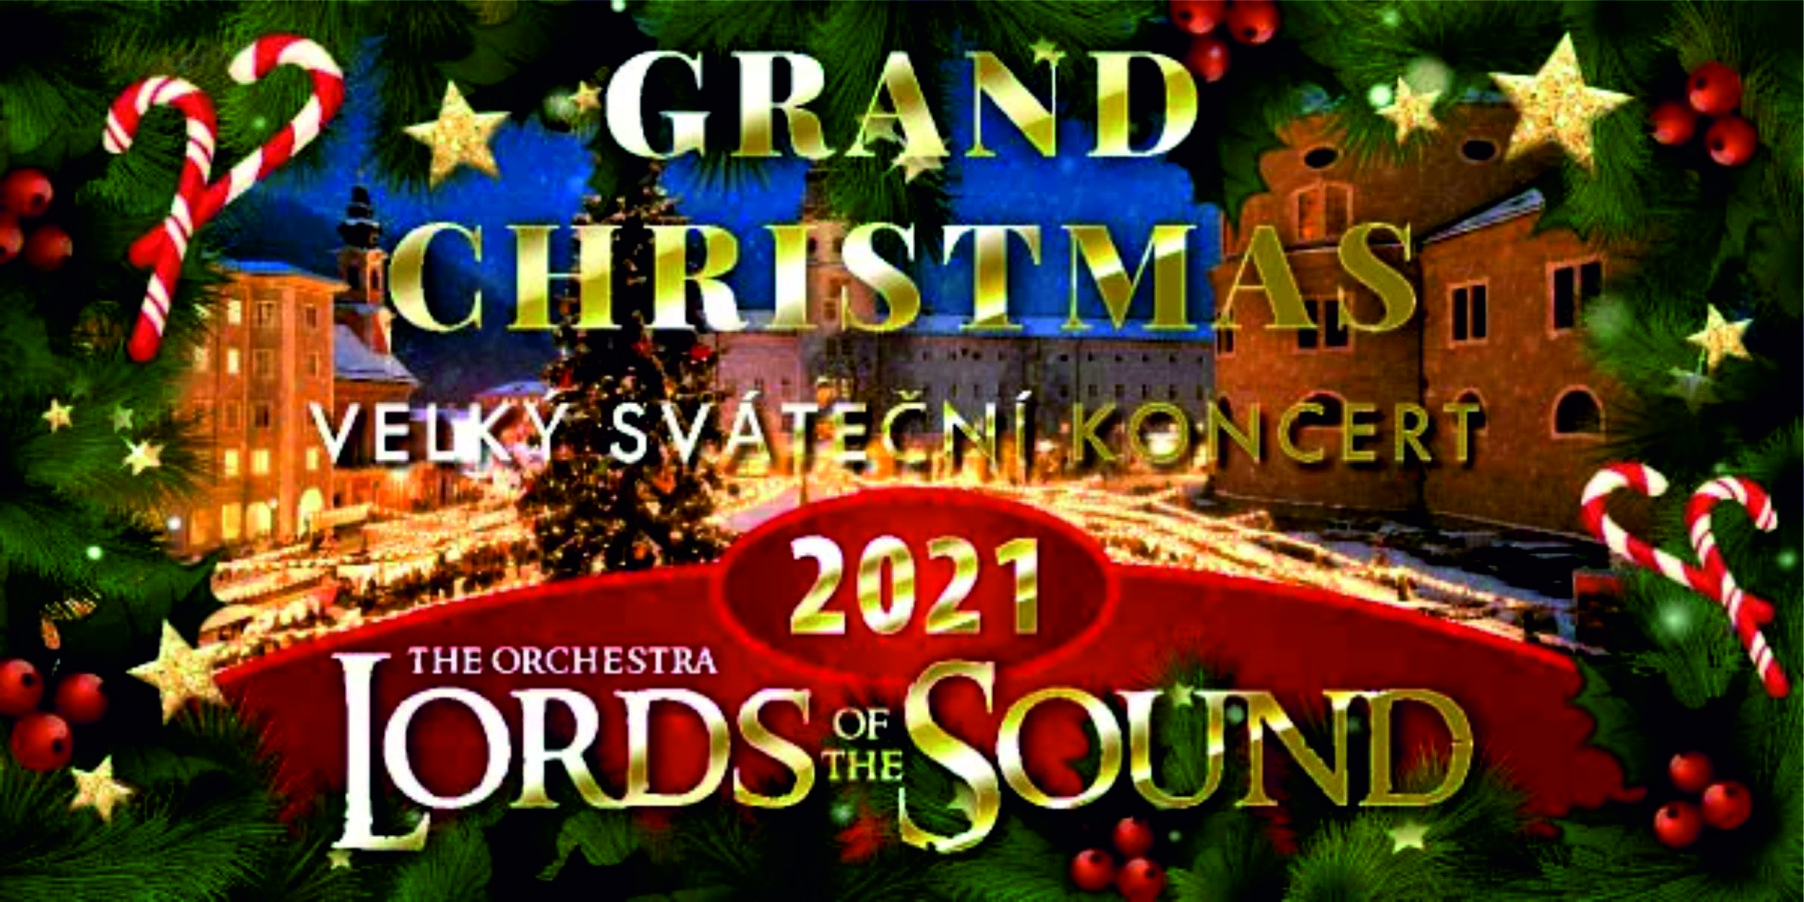 LORDS OF THE SOUND: GRAND CHRISTMAS